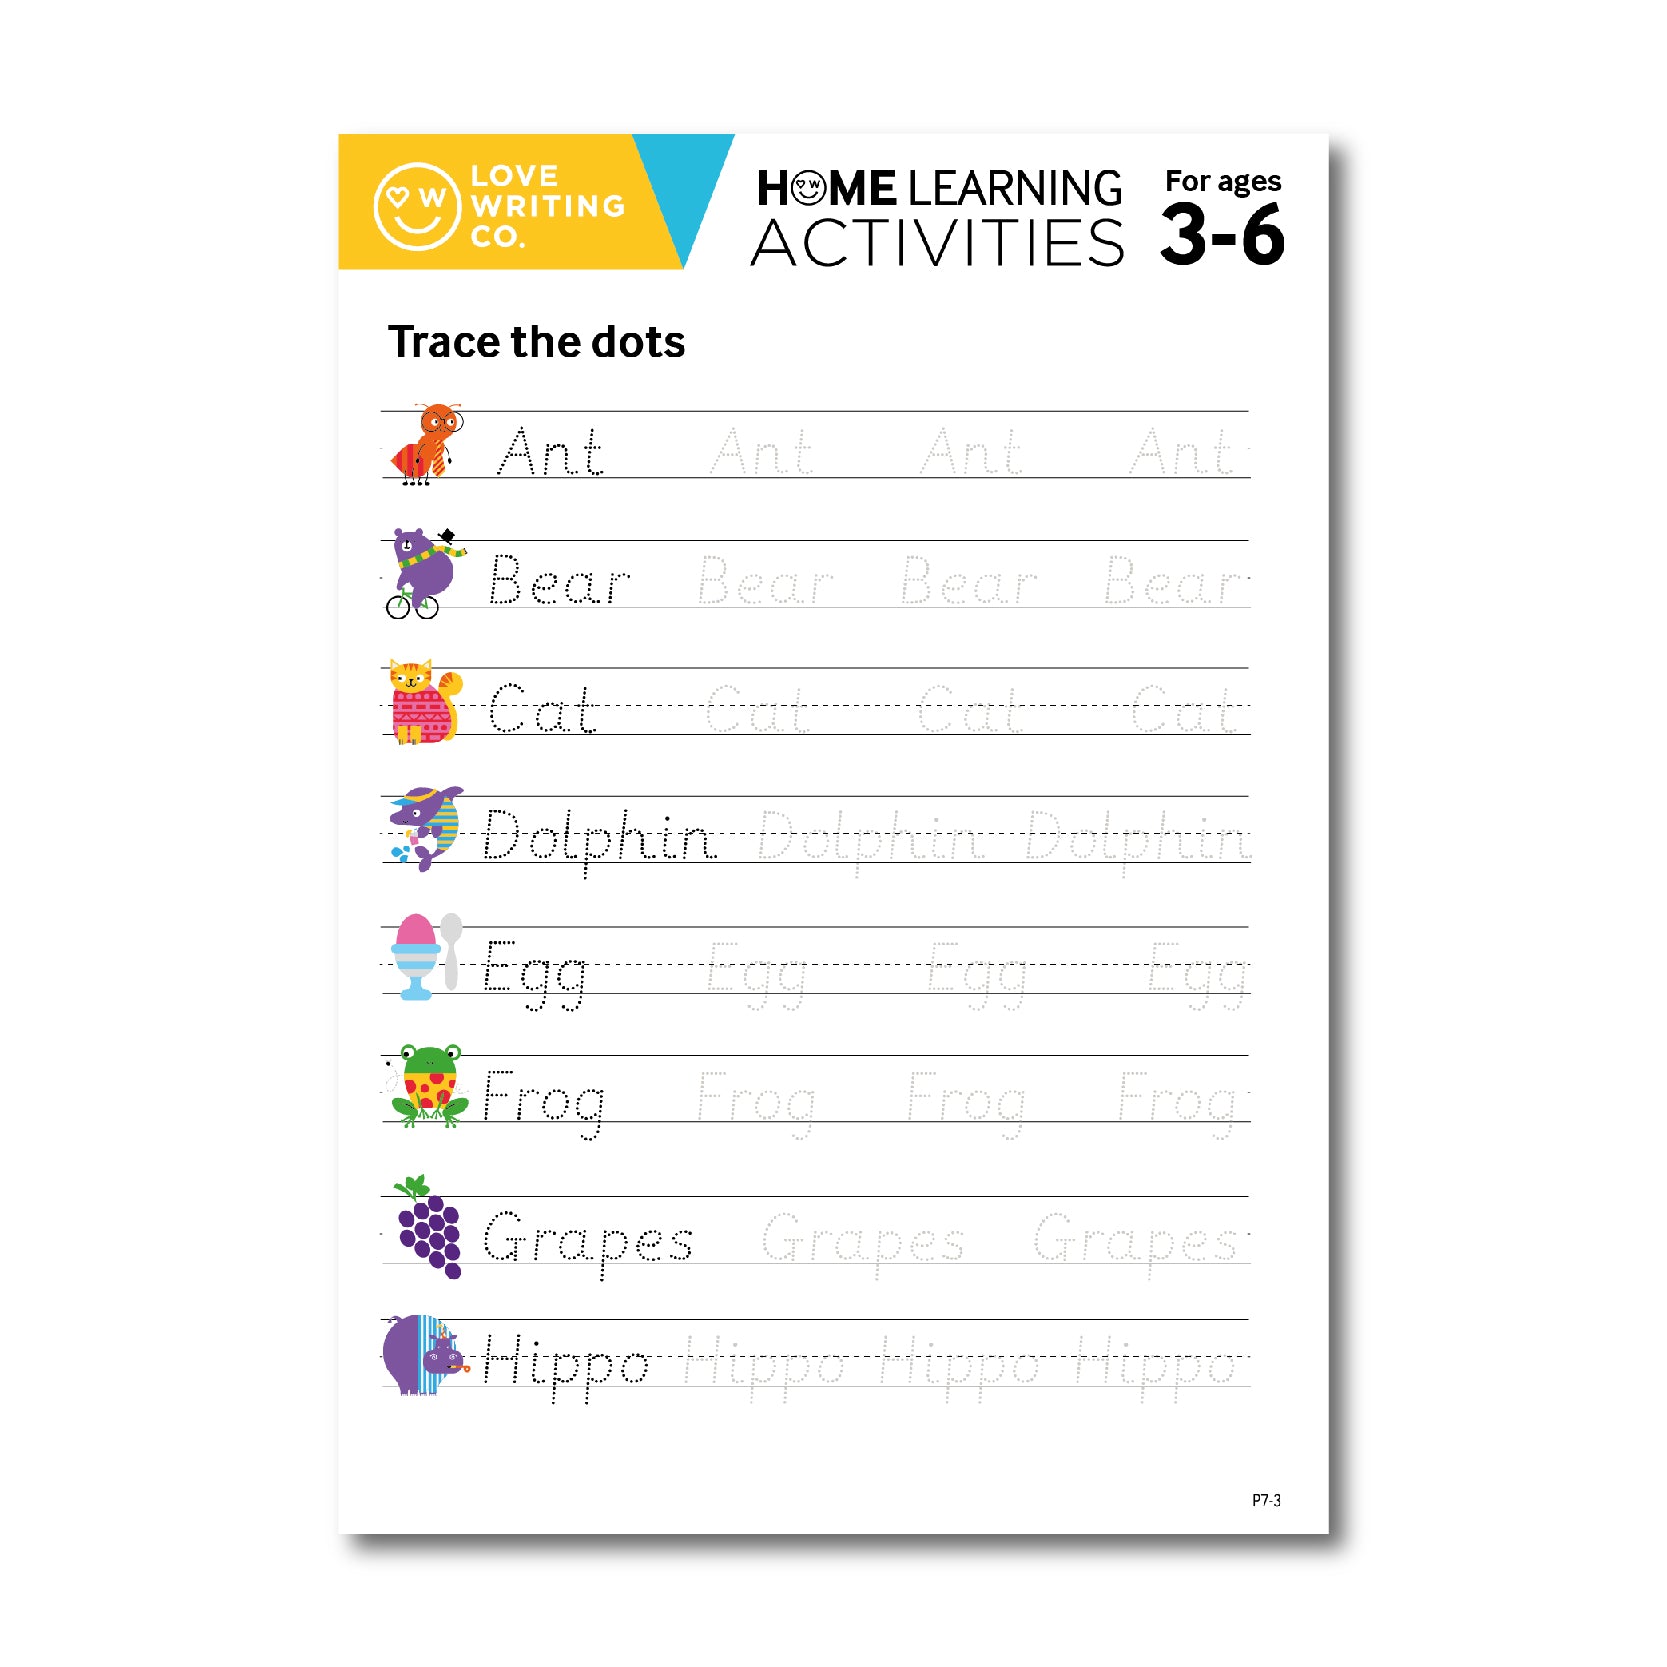 Trace the dots activity to name the animals